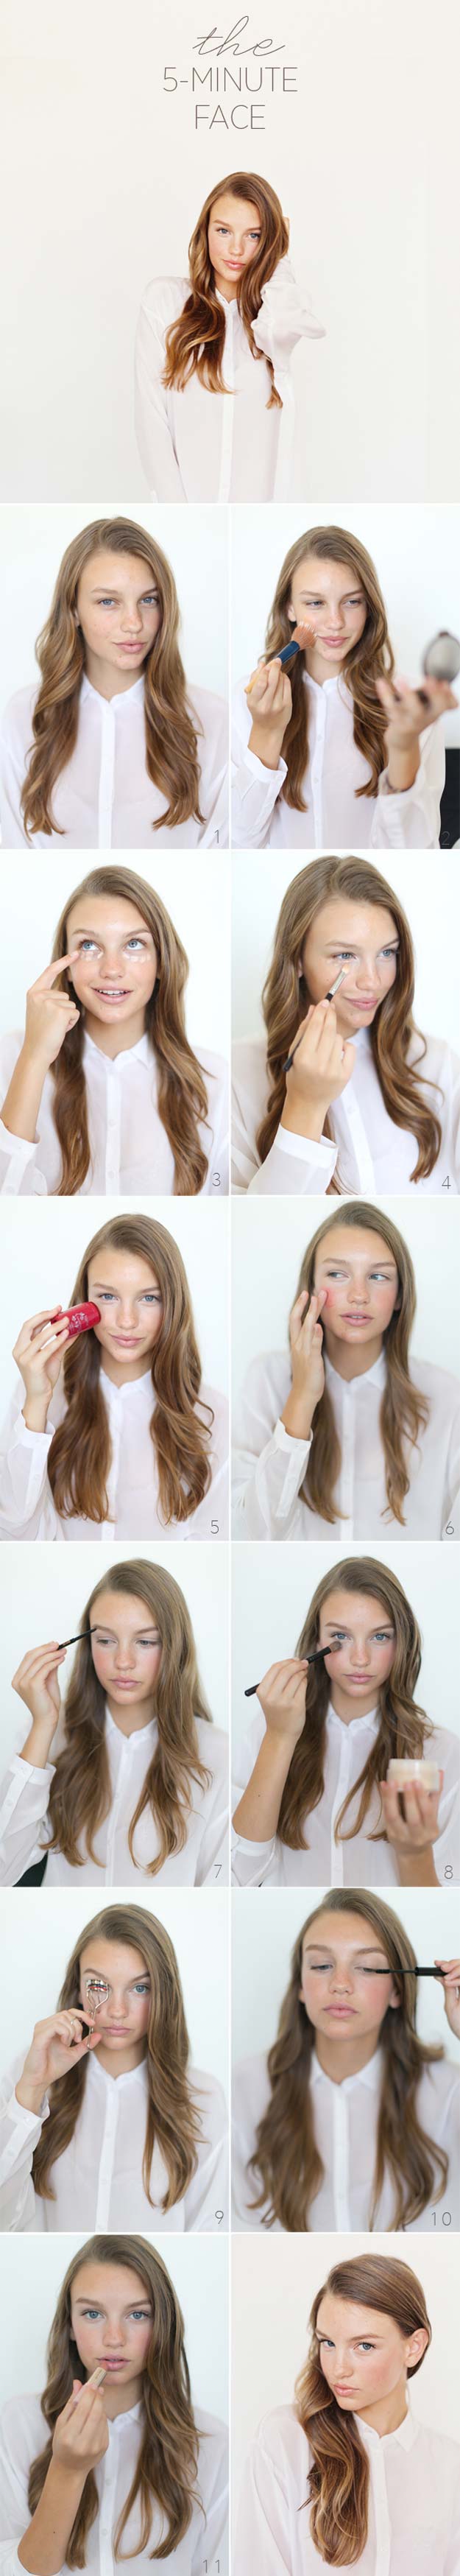 Best Makeup Tutorials for Teens -The 5 Minute Face Beauty Tutorial - Easy Makeup Ideas for Beginners - Step by Step Tutorials for Foundation, Eye Shadow, Lipstick, Cheeks, Contour, Eyebrows and Eyes - Awesome Makeup Hacks and Tips for Simple DIY Beauty - Day and Evening Looks http://diyprojectsforteens.com/makeup-tutorials-teens 